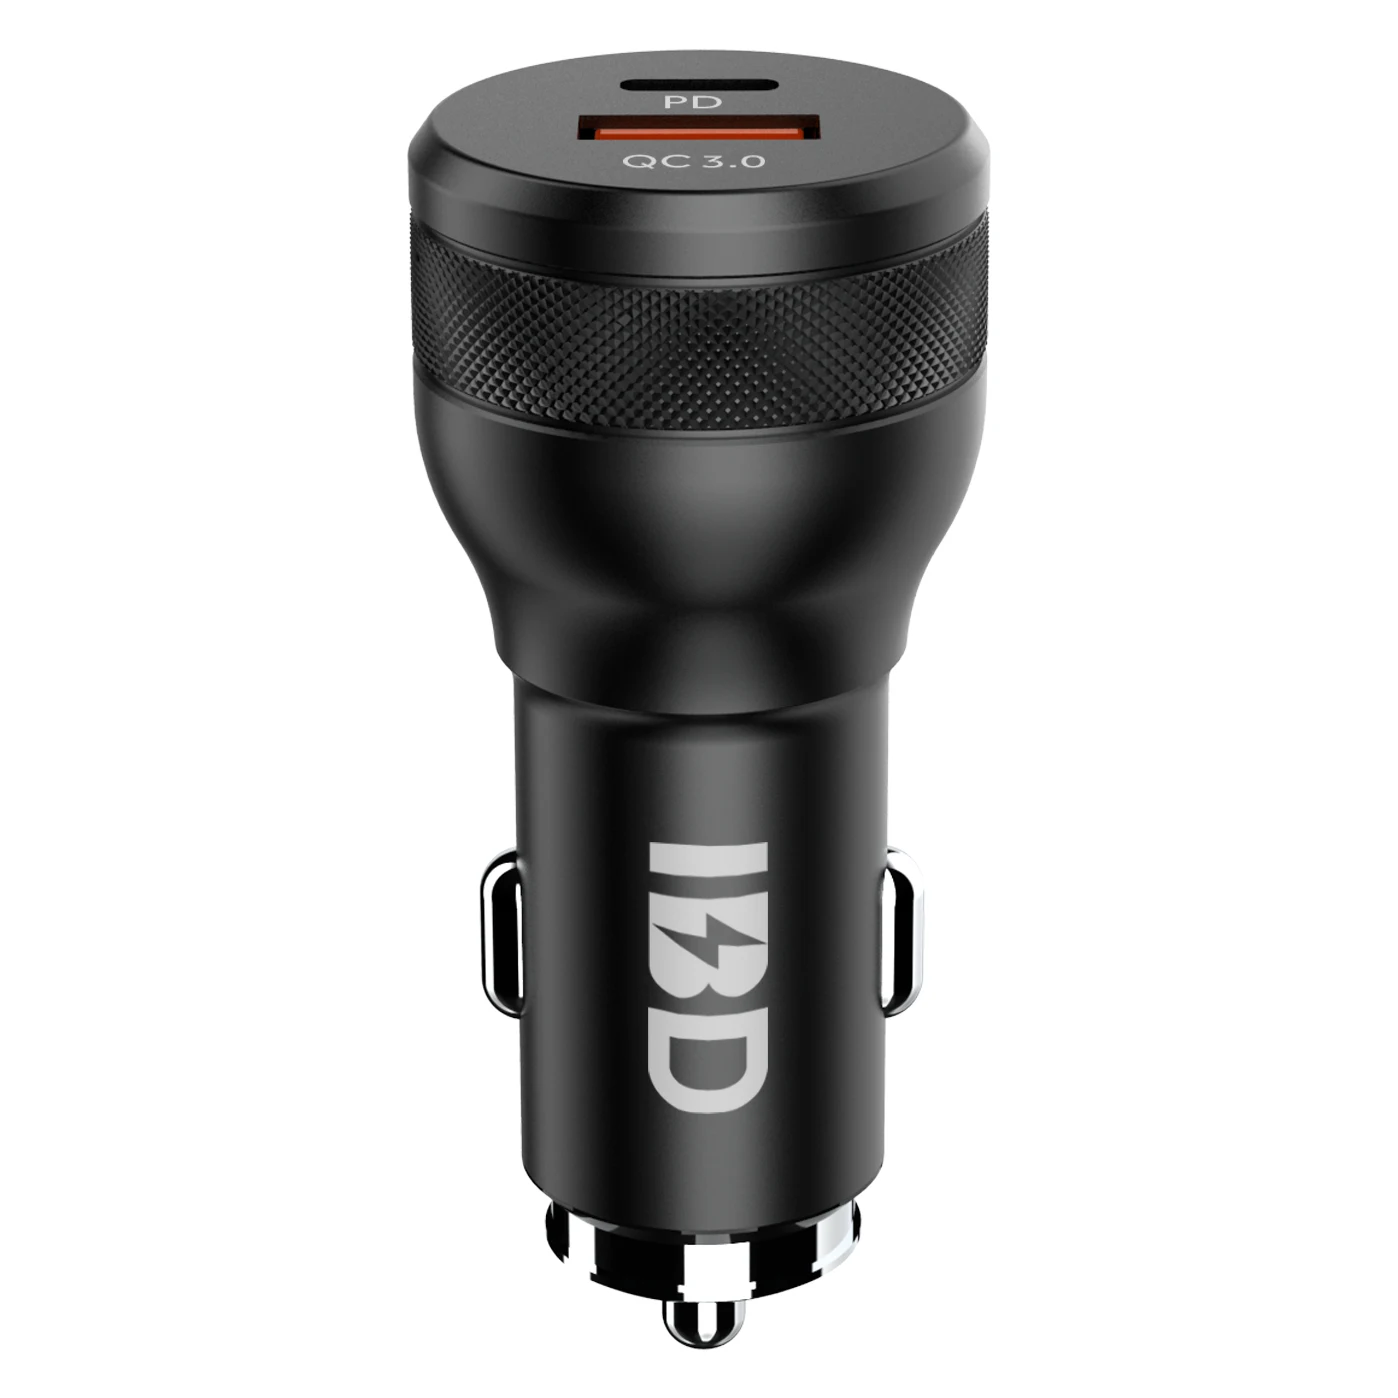 

IBD Best Selling PD Car Charger USB C 45W 2-Port Compact QC3.0 Car Charger For iPhone XS/Max/XR/X/8/7/6s iPad Pro/Air Macbook